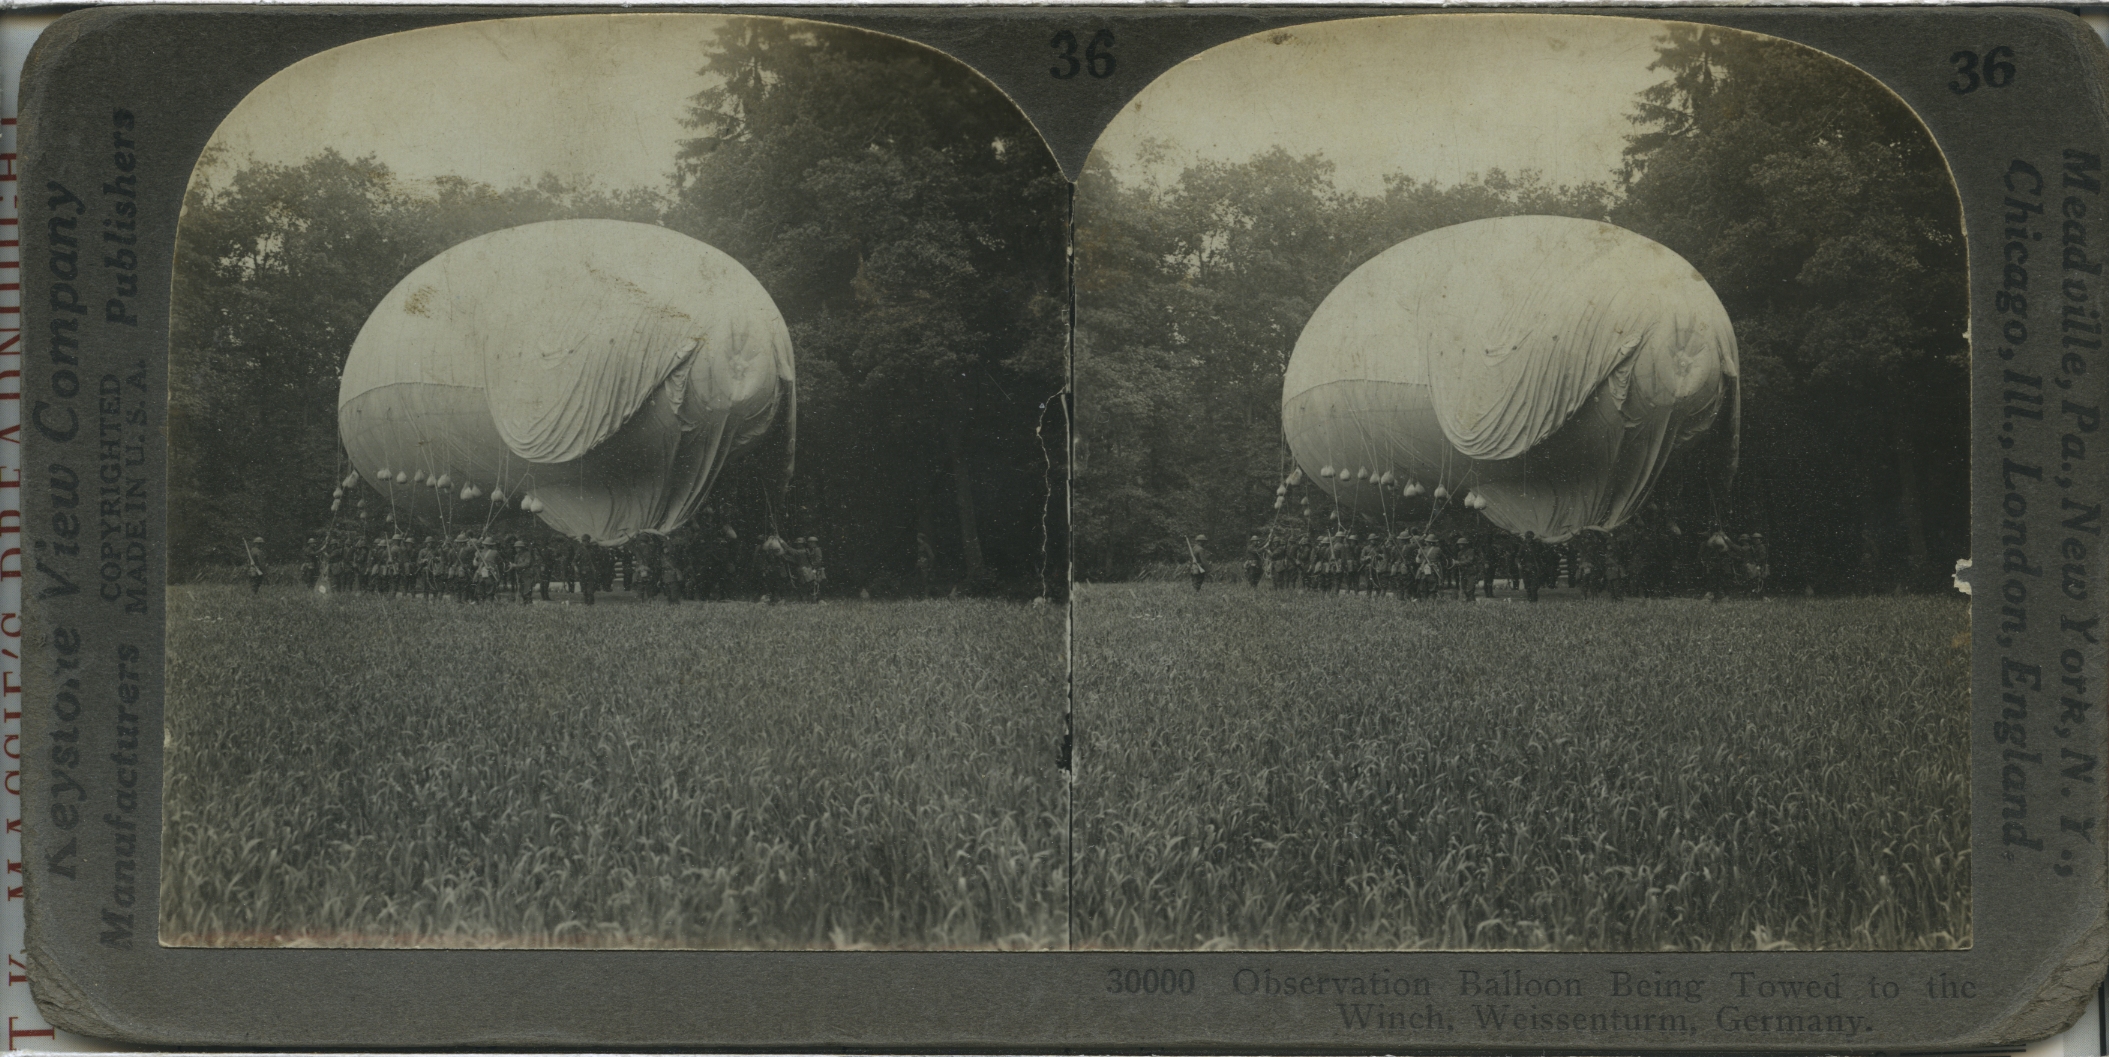 Observation Balloon Being Towed to the Winch, Weissenburg, Germany